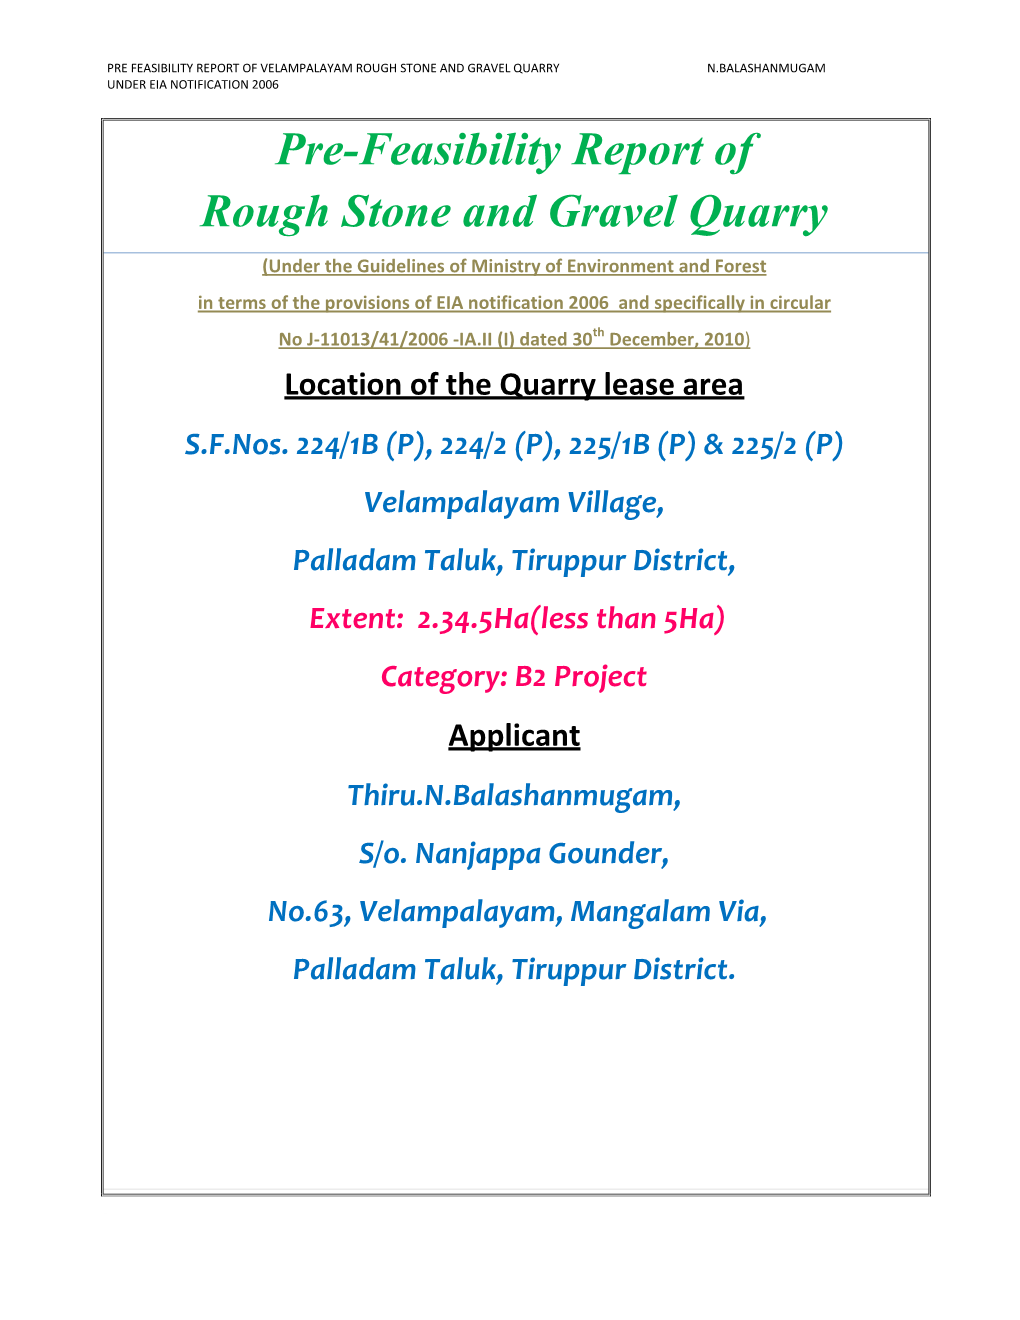 Pre-Feasibility Report of Rough Stone and Gravel Quarry